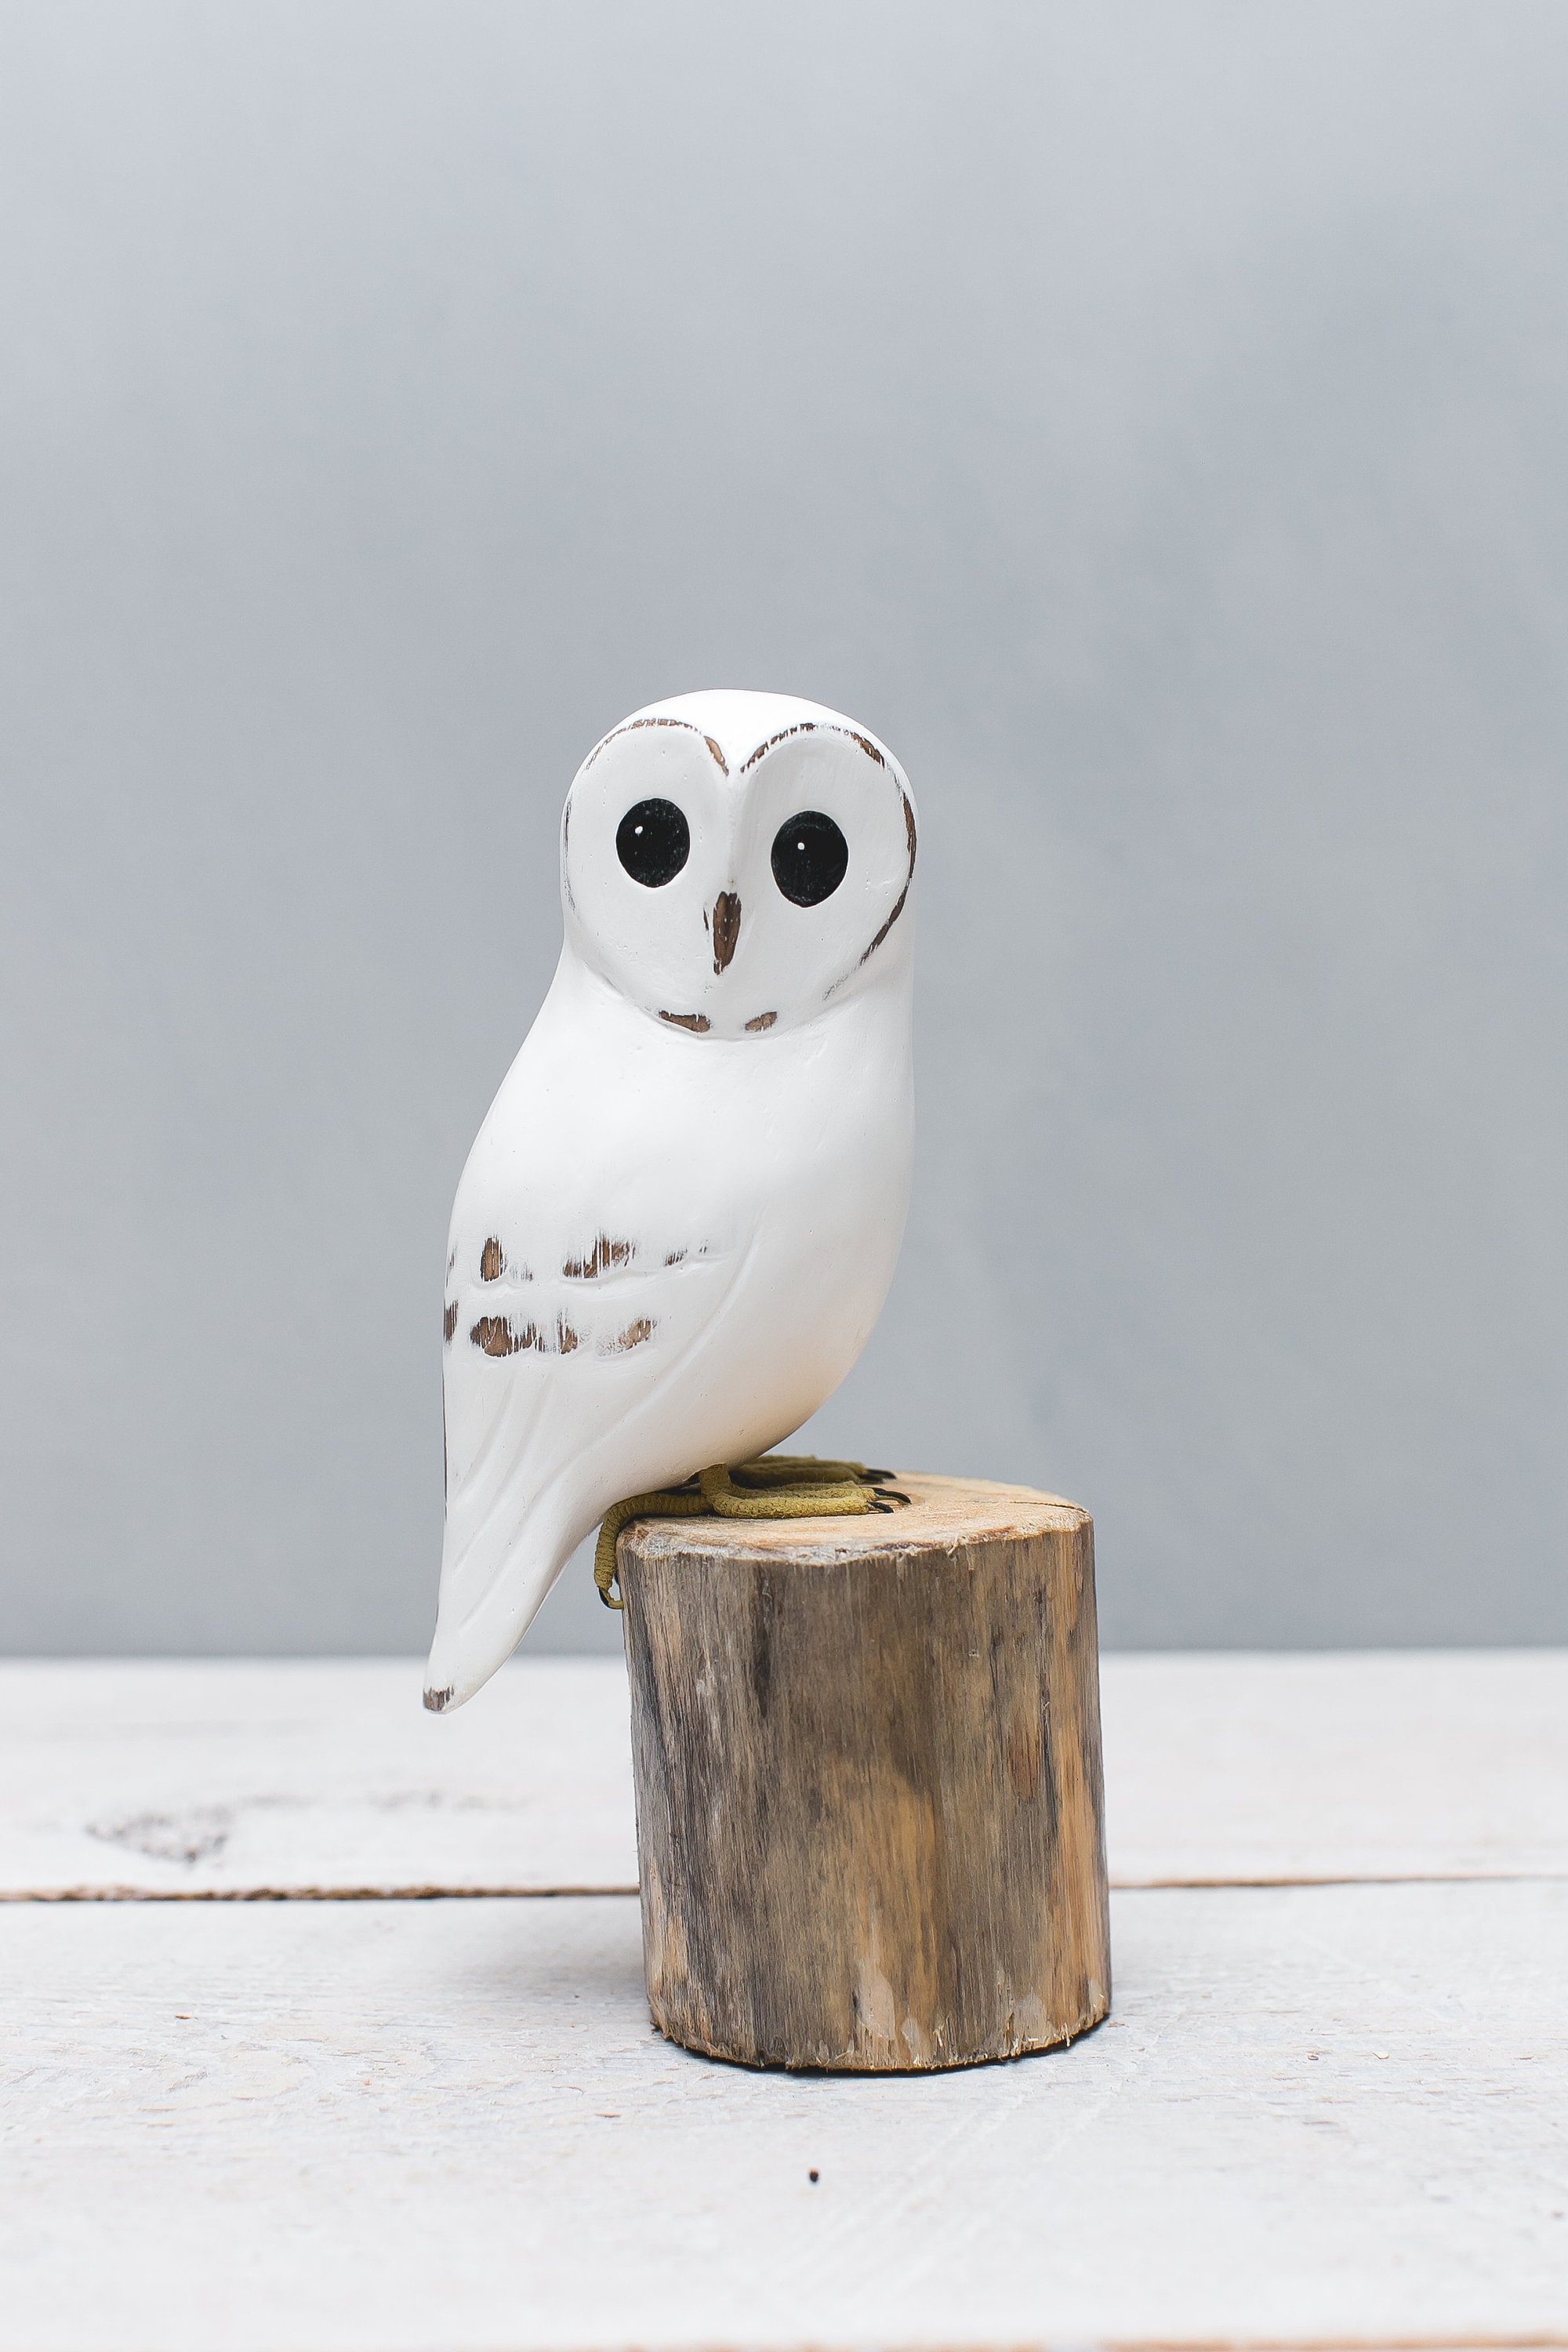 Hand carved owl figurine wooden owl sculpture snow owl statue